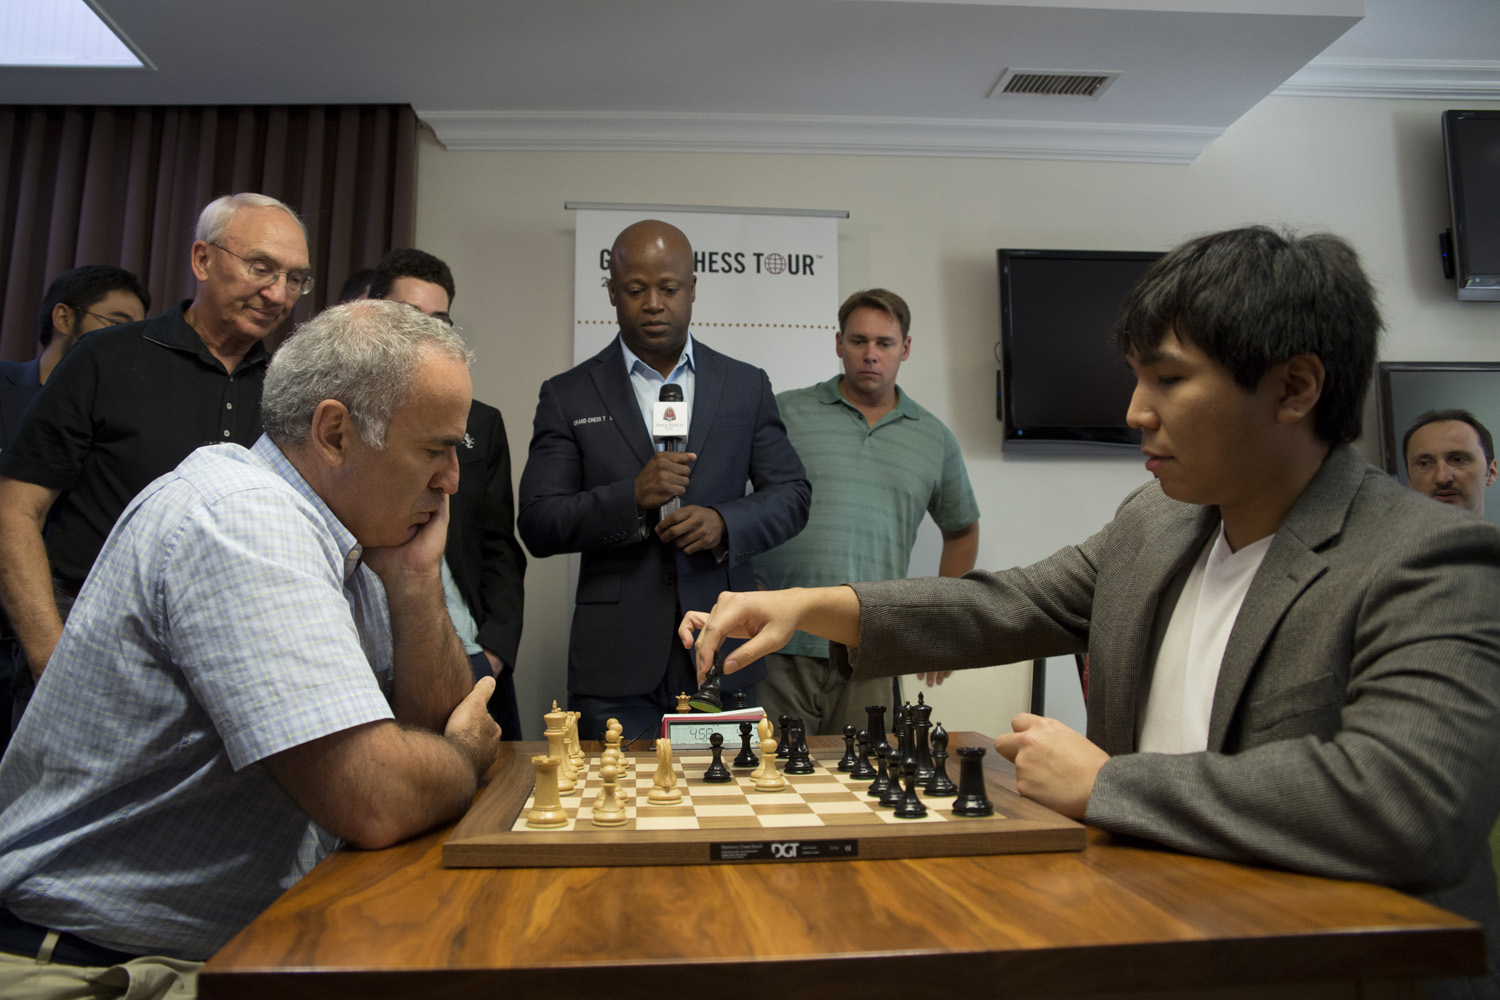 Grandmaster chess legend Garry Kasparov, left, competes against Grandmaster and 2016 Sinquefield Cup Champion Wesley So, right, during the Sinquefield Cup Chess Tournament's Ultimate Moves exhibition match. (Nick Schnelle/AP))